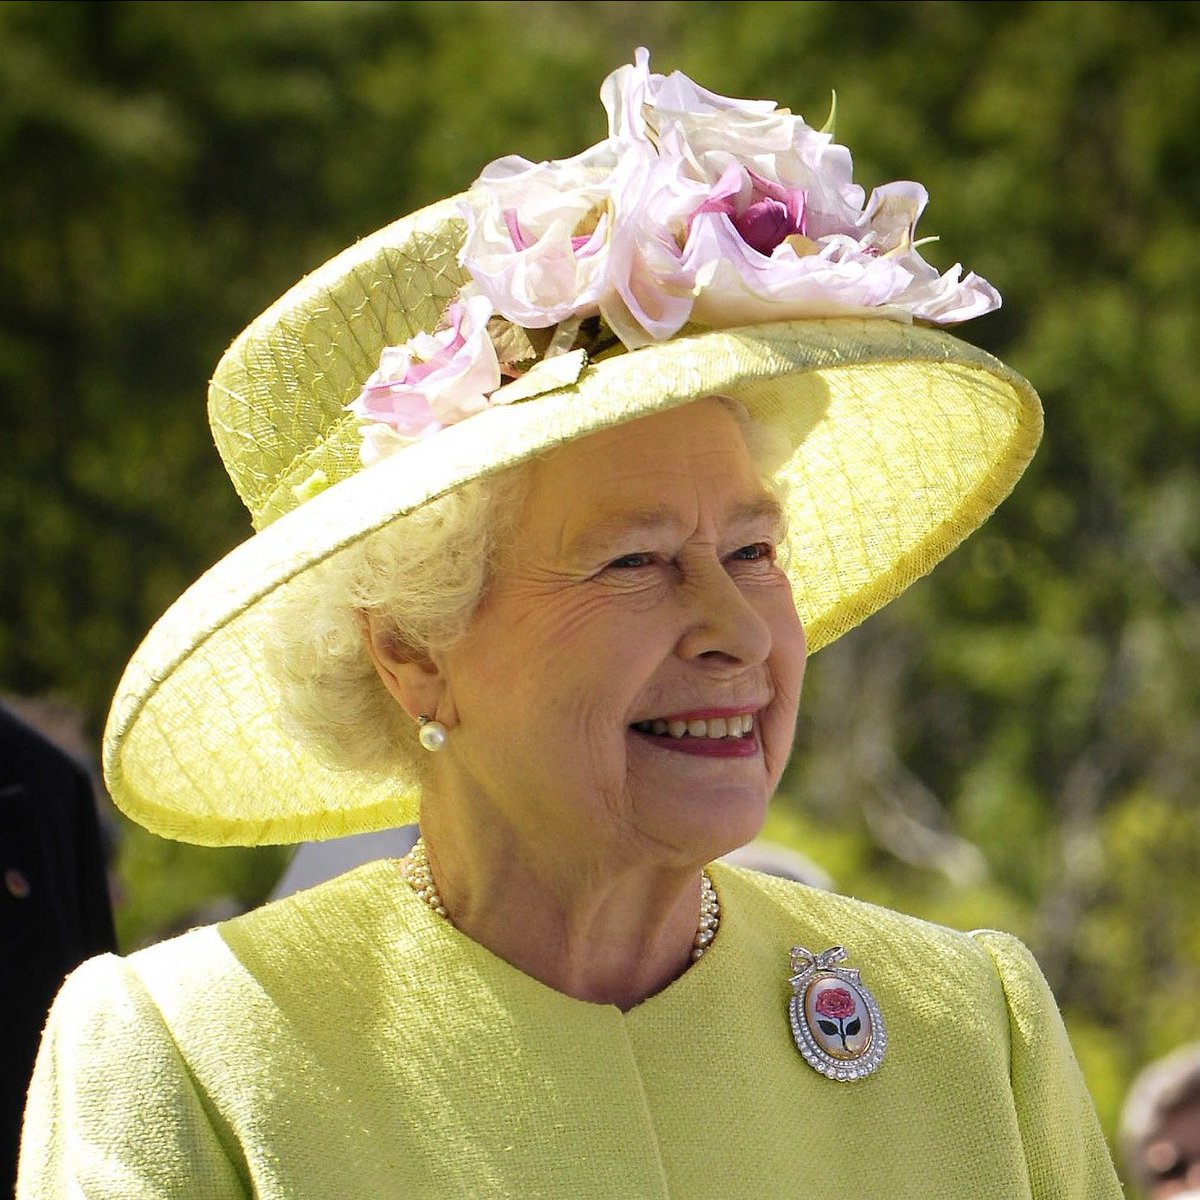 We are joining millions of people around to the world in this moment. It was with the utmost sadness that we learned of the death of Her Majesty Queen Elizabeth II yesterday. Her devotion and commitment to duty have been an inspiration to all. #Queen #jerseyci #jerseyhospitality